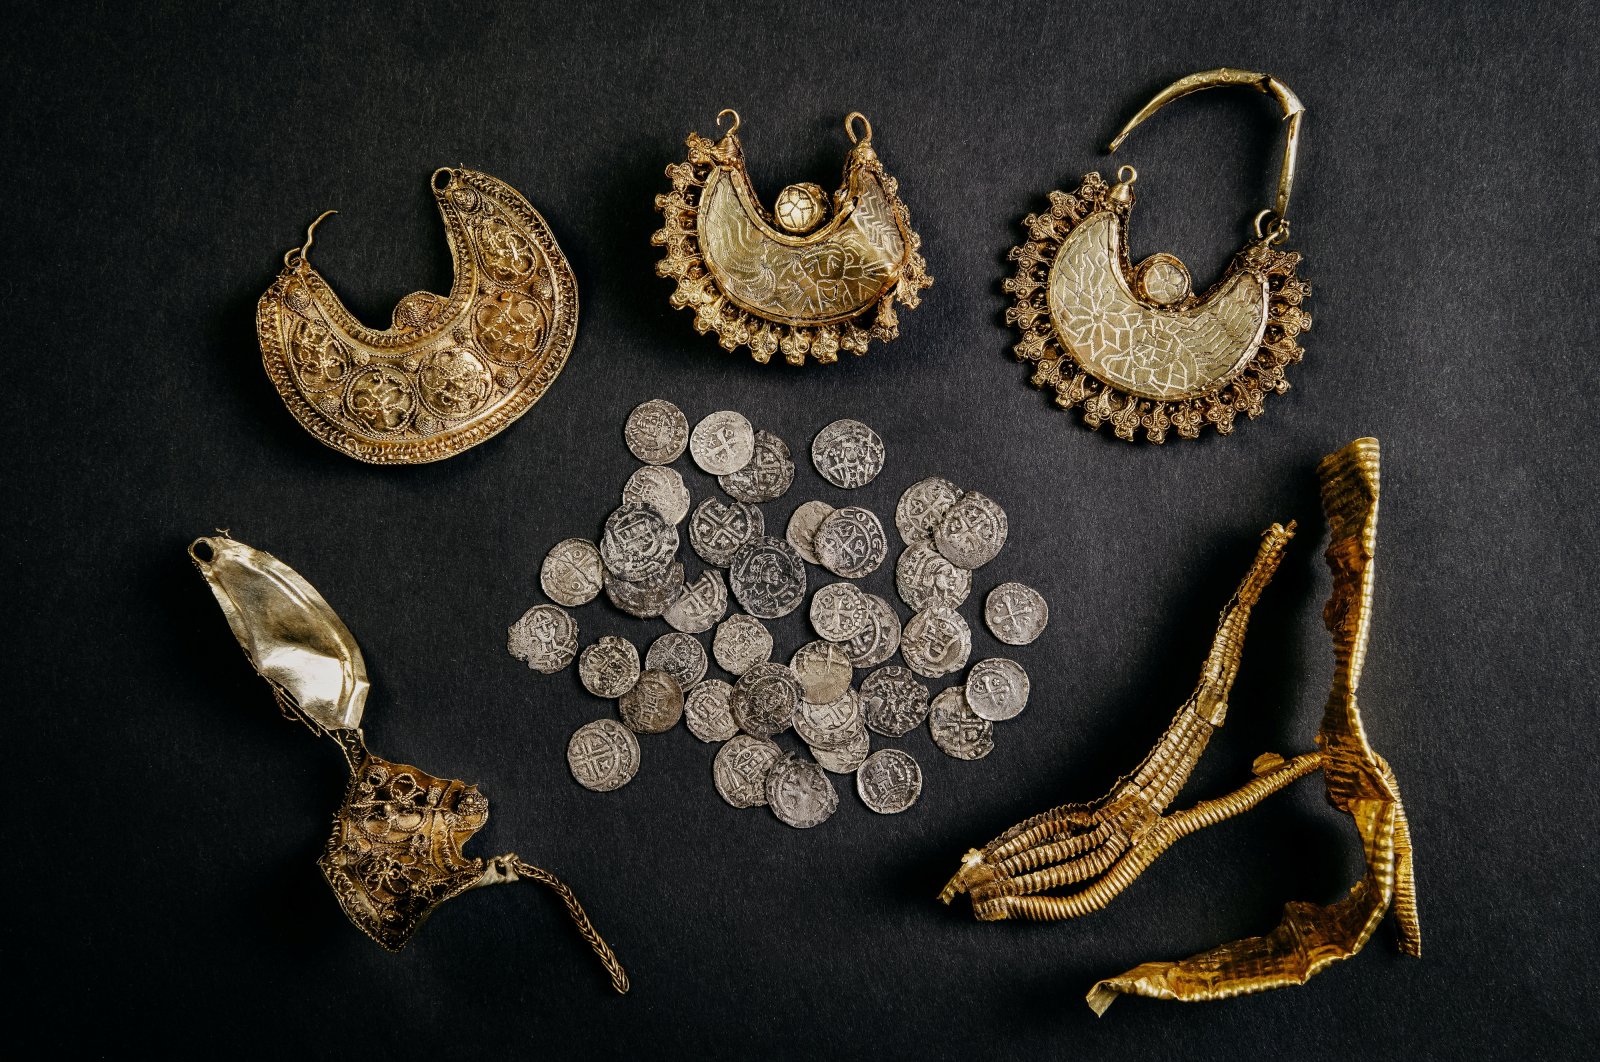 1000-year-old medieval treasure discovered in Hoogwoud, Netherlands, consisting of jewelery and silver coins, is shown in this undated handout picture. (Reuters Photo)